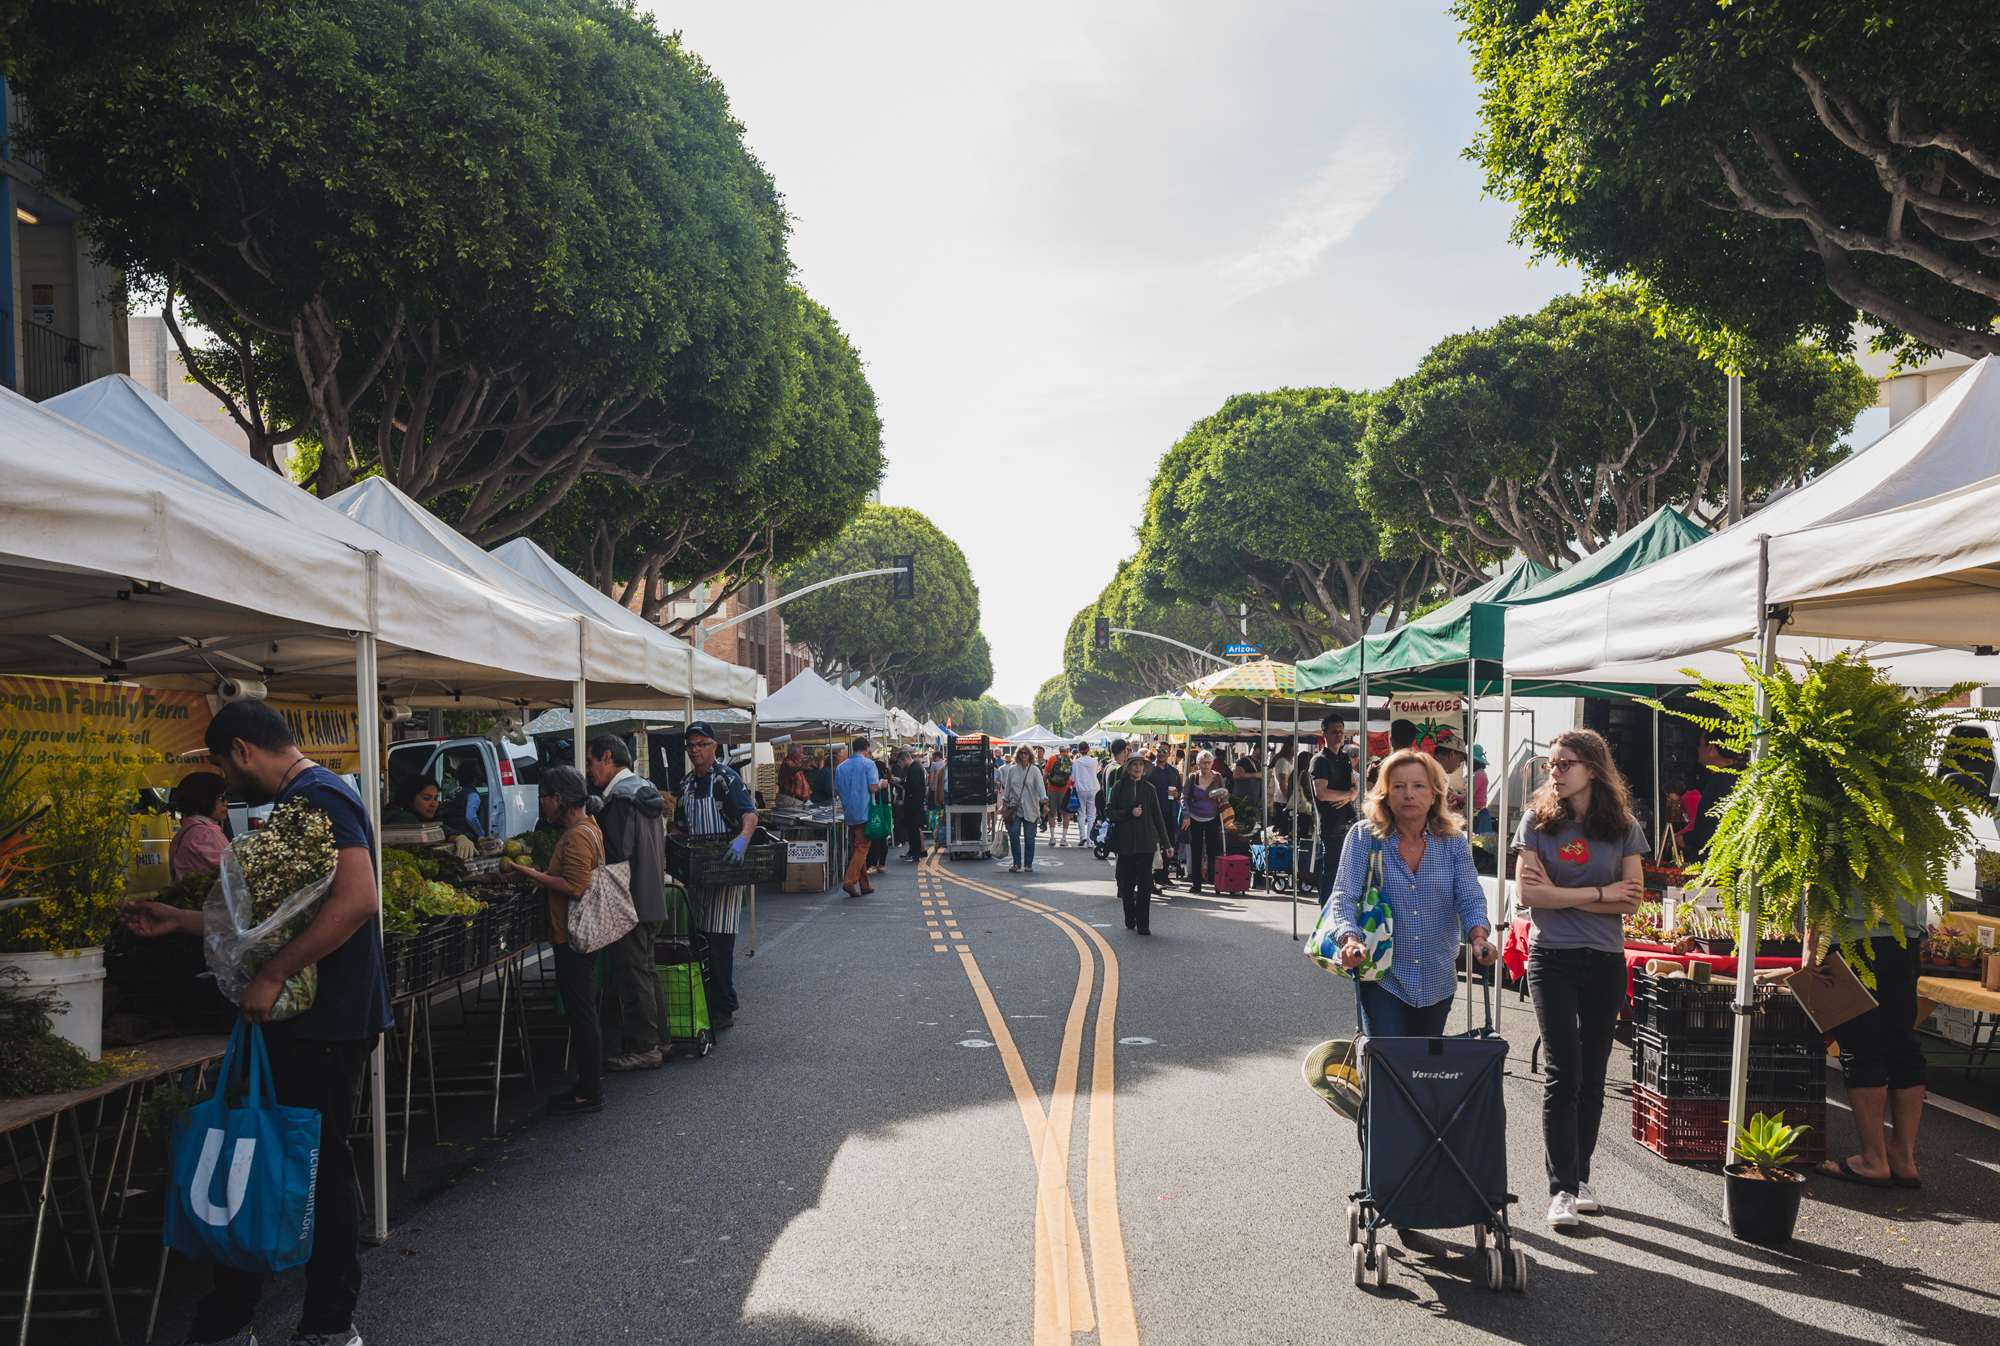 Chefs and home cooks alike flock to the Wednesday Santa Monica Farmers Market. This is where Jeremy Fox finds ingredients like salsify flowers and parts of vegetables often overlooked or discarded by other cooks.